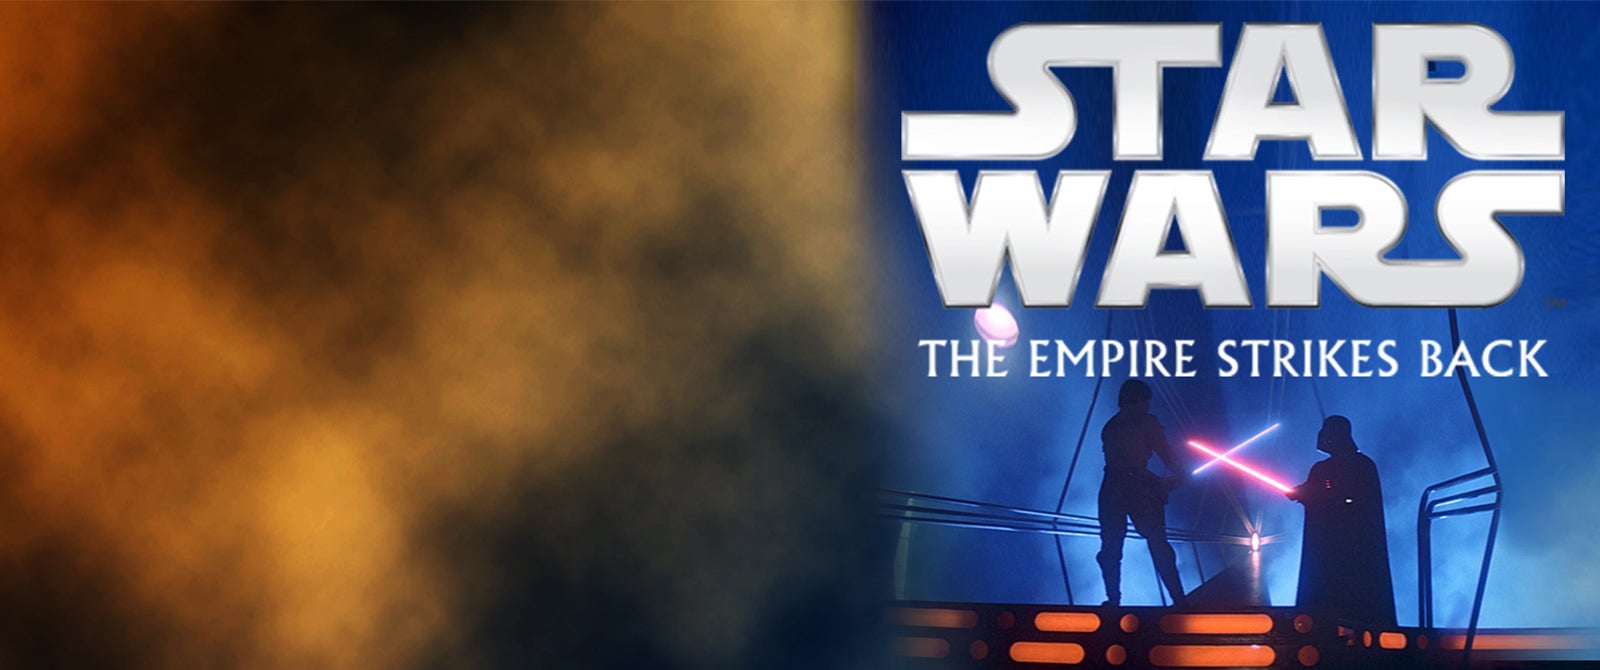 Star Wars The Empire Strikes Back in Concert New Jersey Symphony